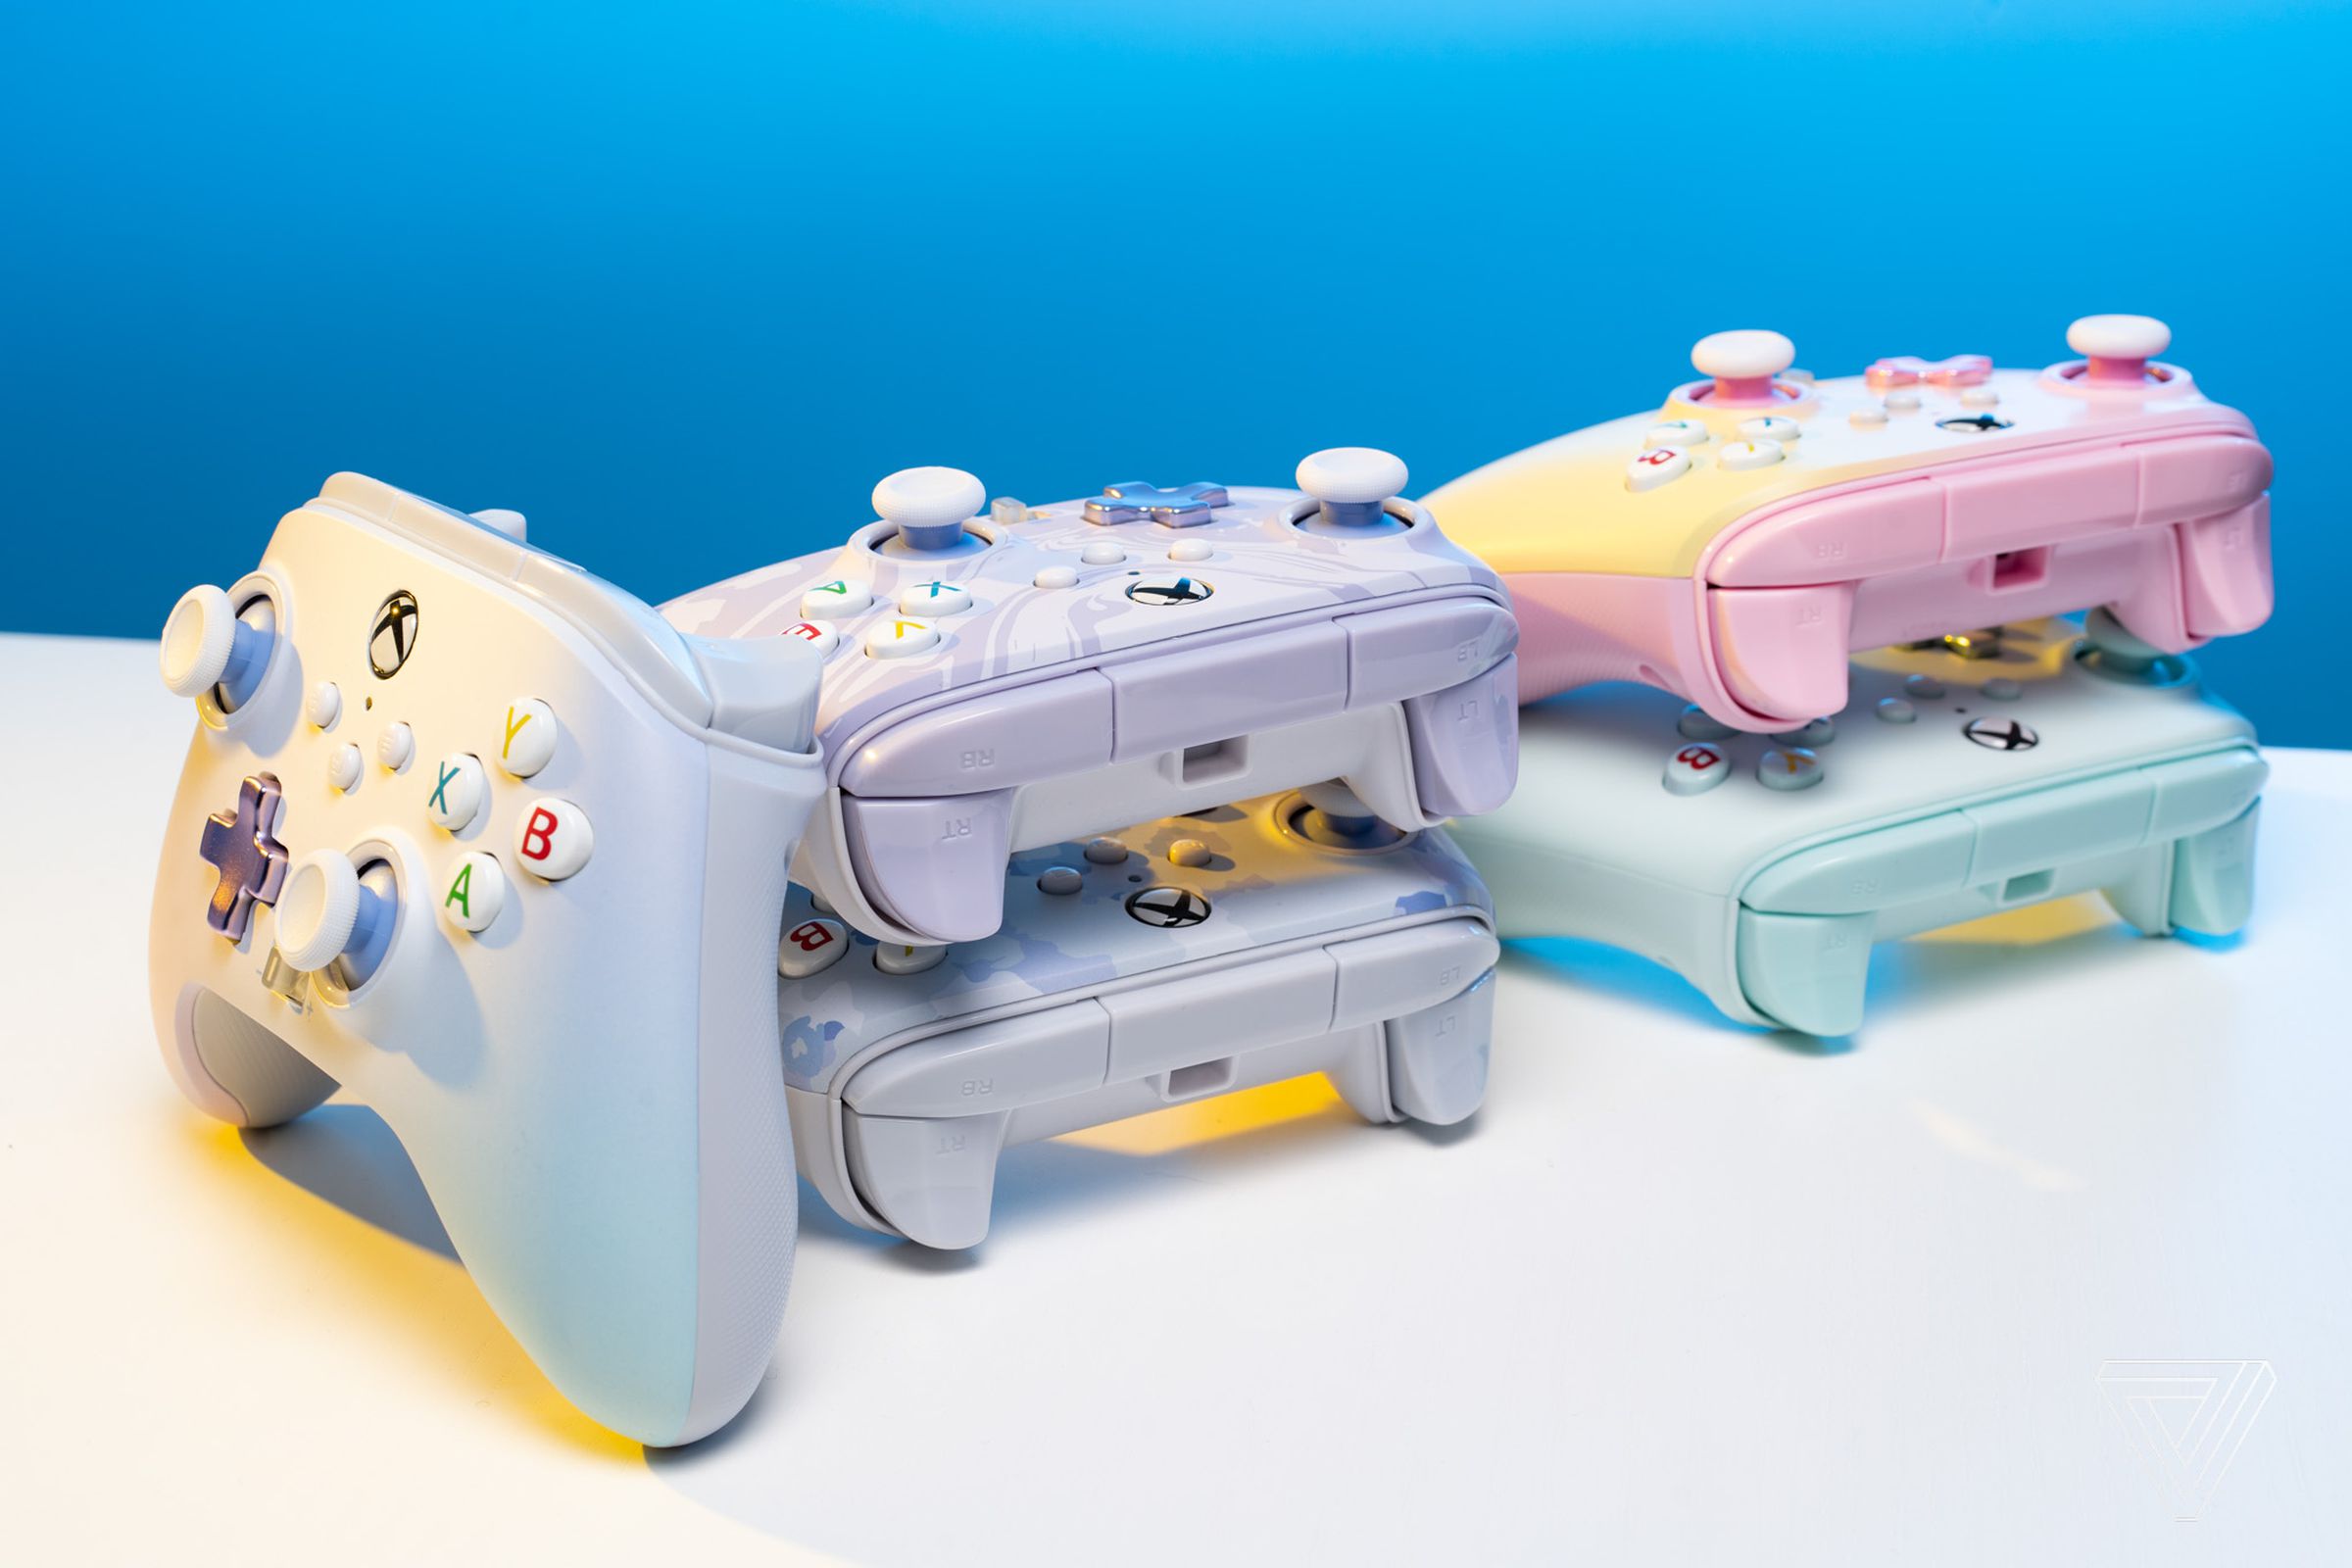 Marshmallowy vibes for days. The controllers have smooth, satin finishes on the front, lightly textured backs, and glossy accents on the shoulders and bumpers.